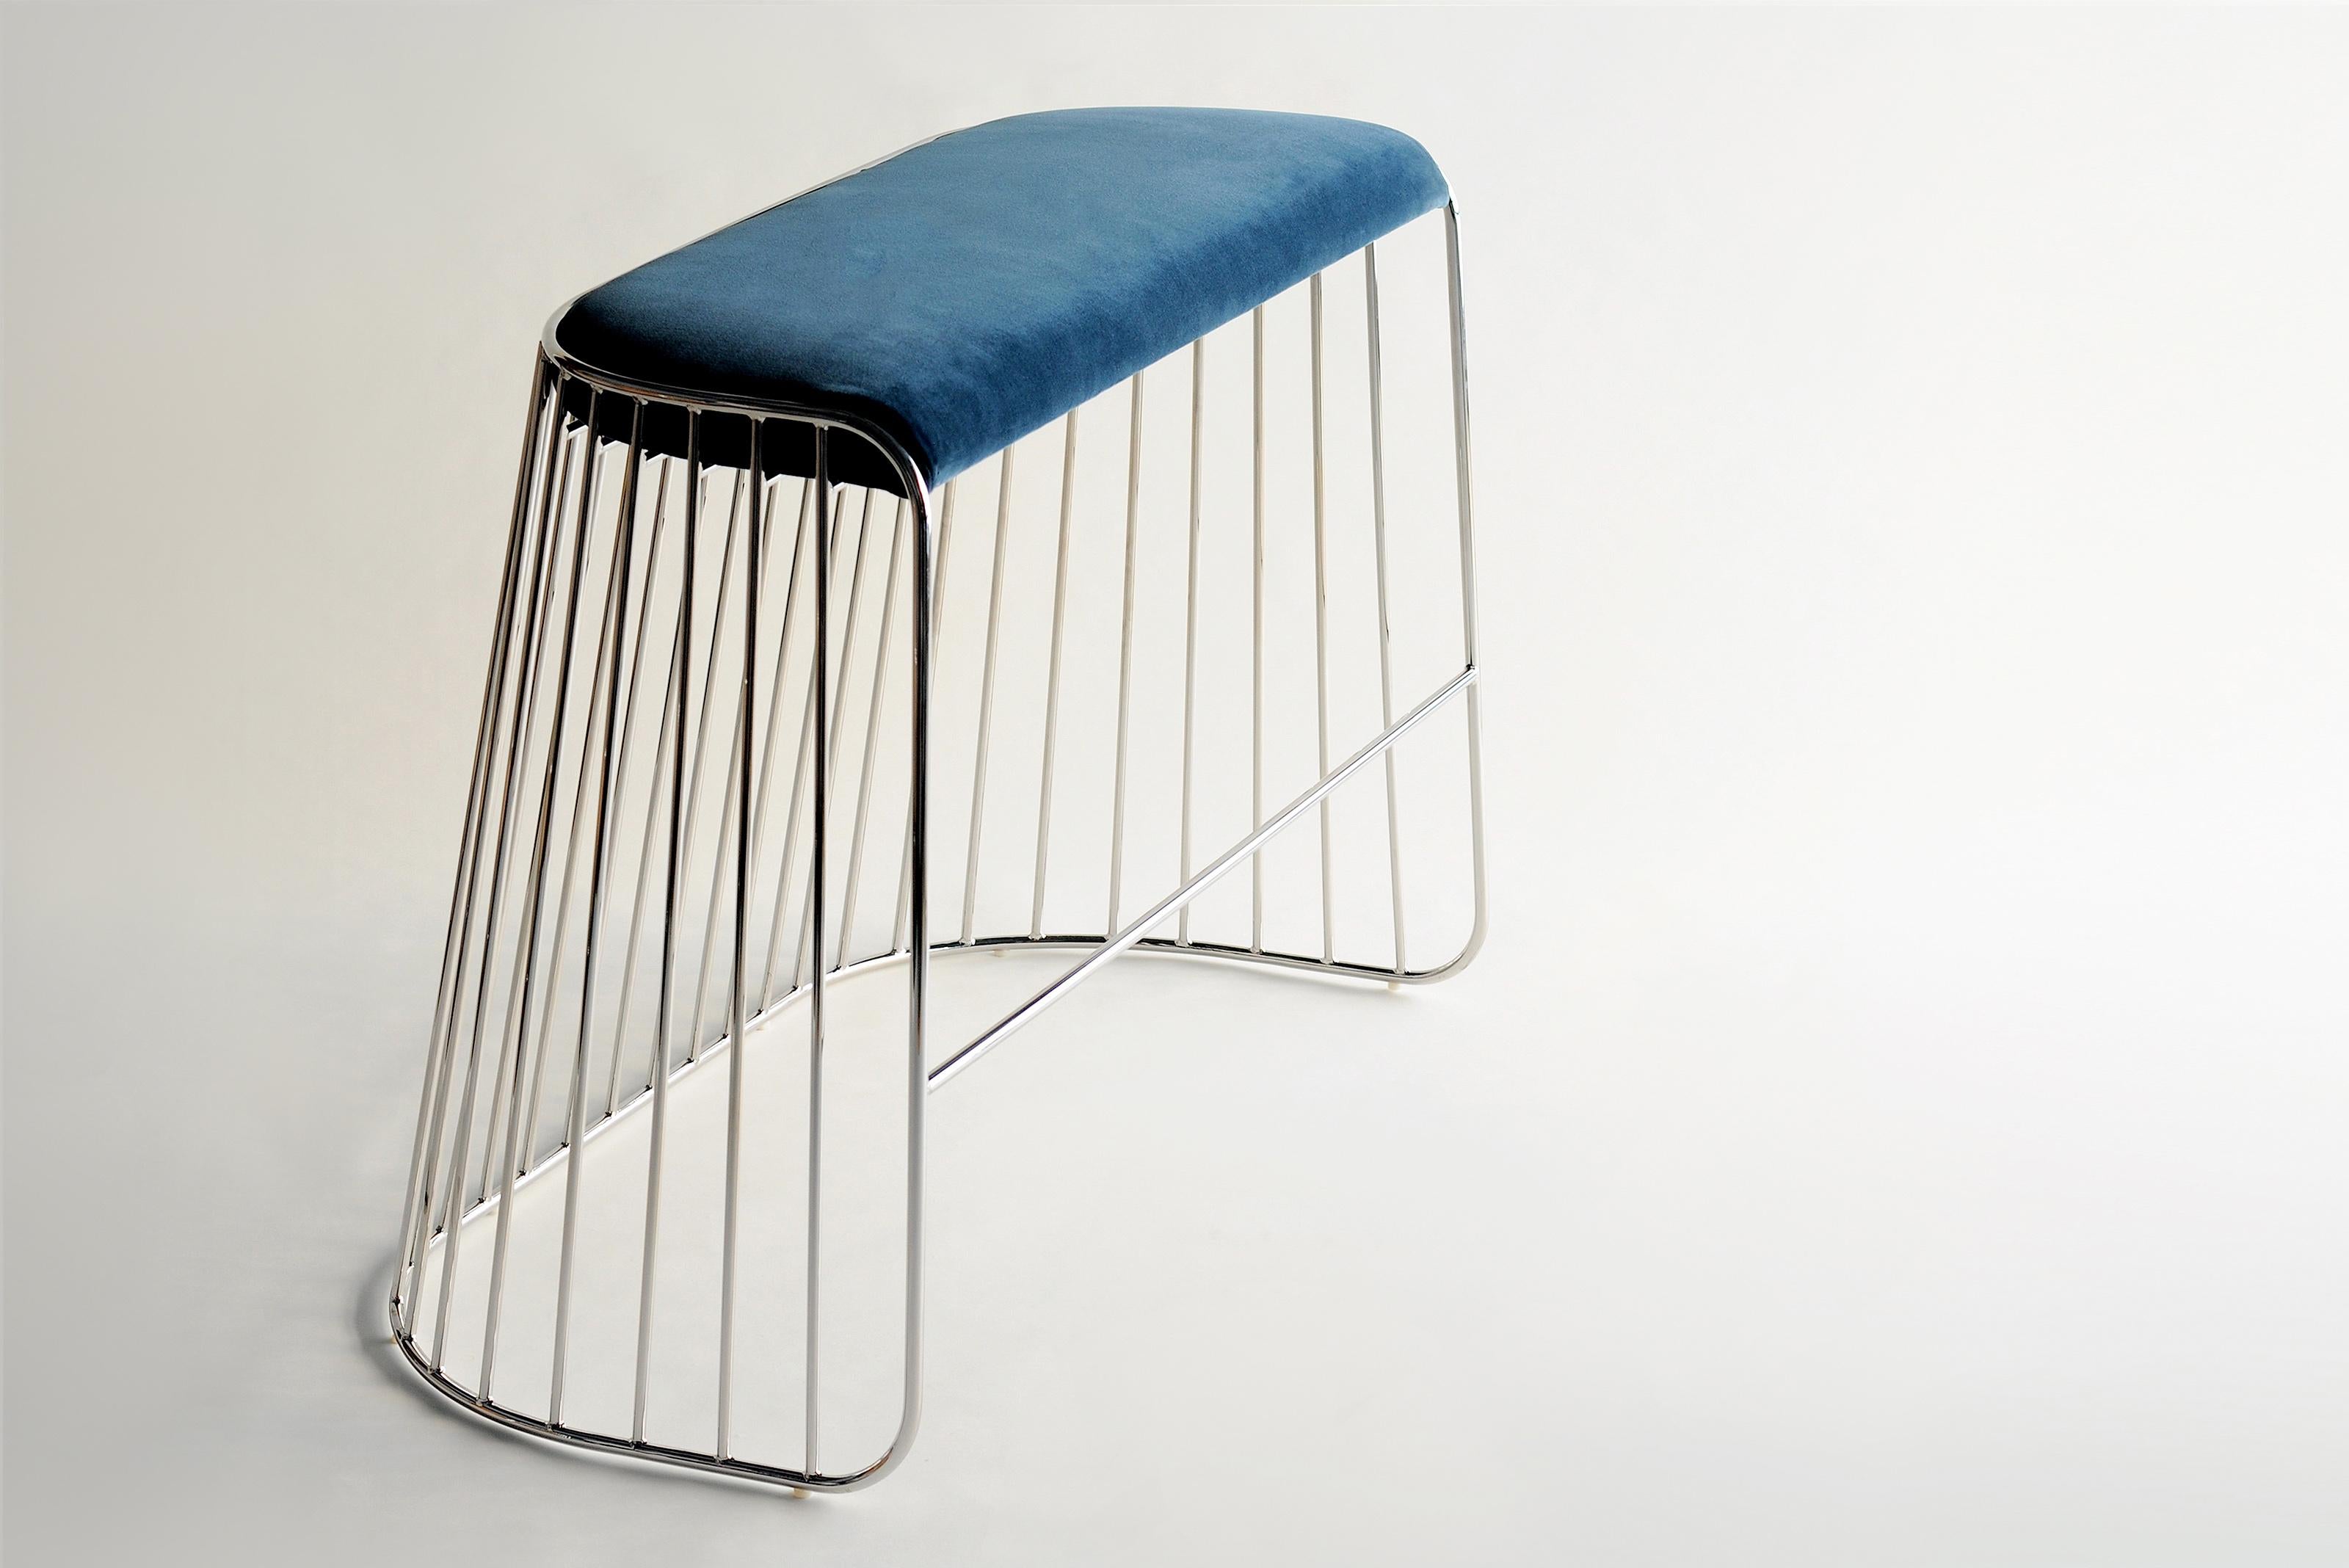 Bride’s Veil Double Low Stool by Phase Design
Dimensions: D 52,1 x W 109,2 x H 45,7 cm.
Materials: Upholstery, steel and polished chrome.

Solid steel bar available in a smoked brass, polished chrome, burnt copper, or powder coat finish with